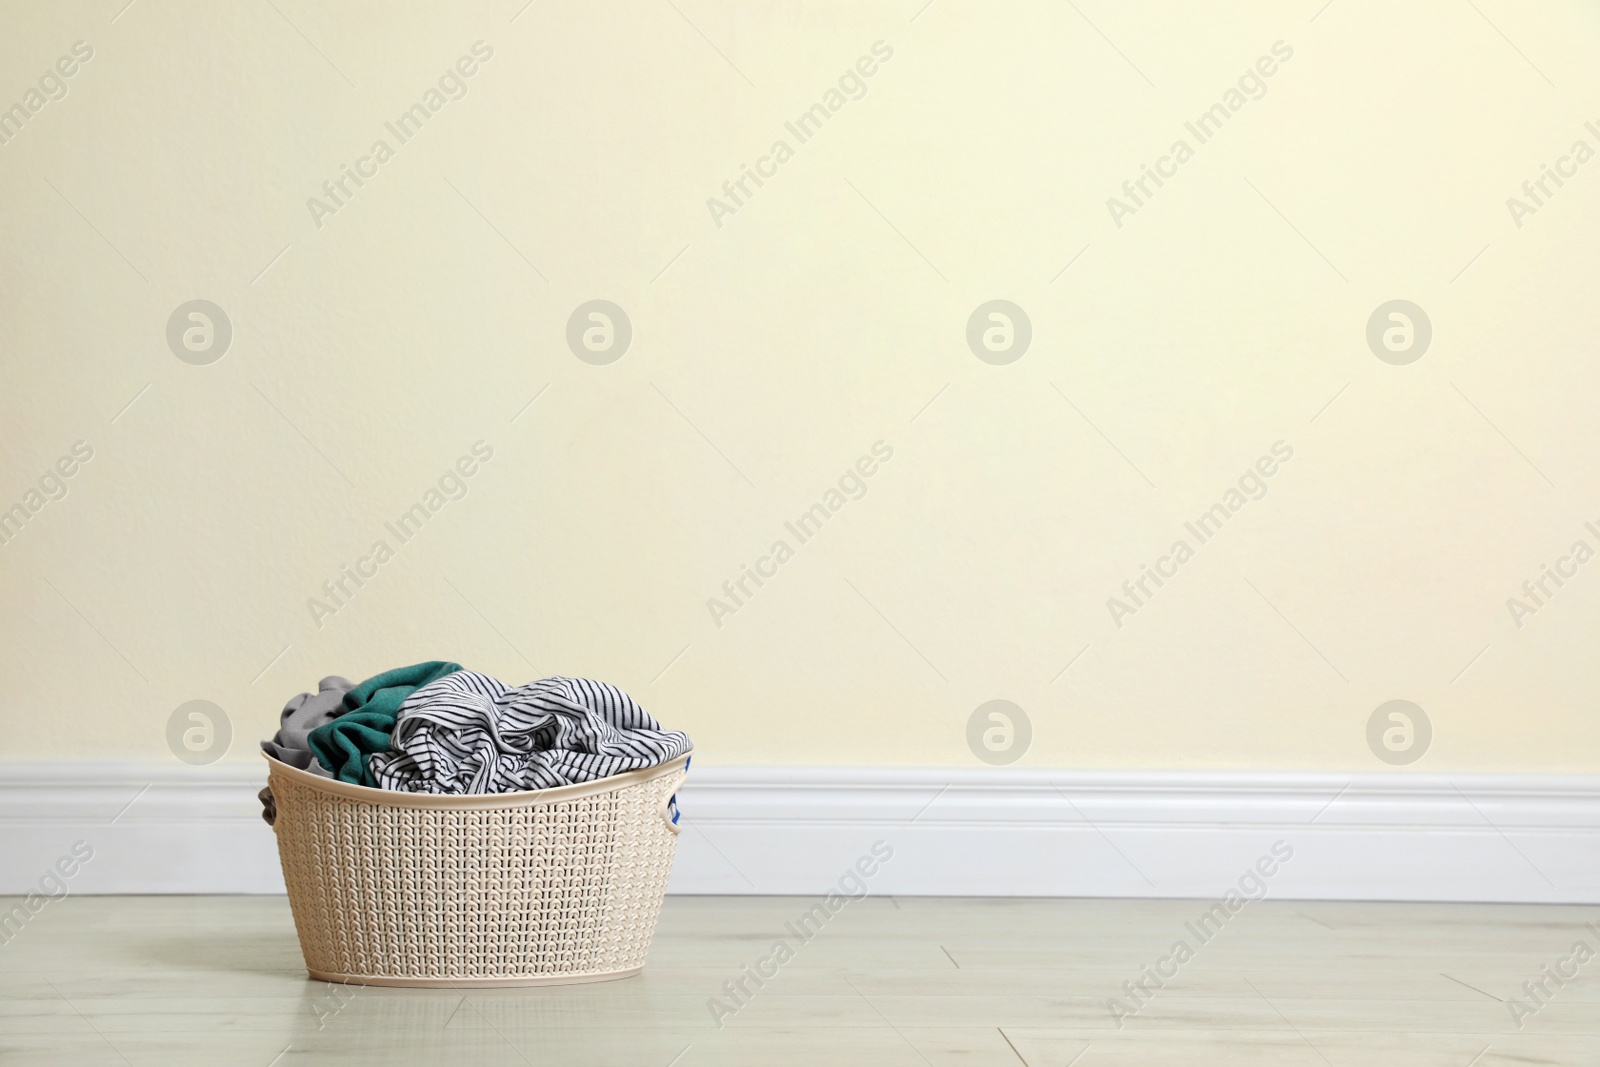 Photo of Plastic laundry basket full of dirty clothes on floor near color wall. Space for text